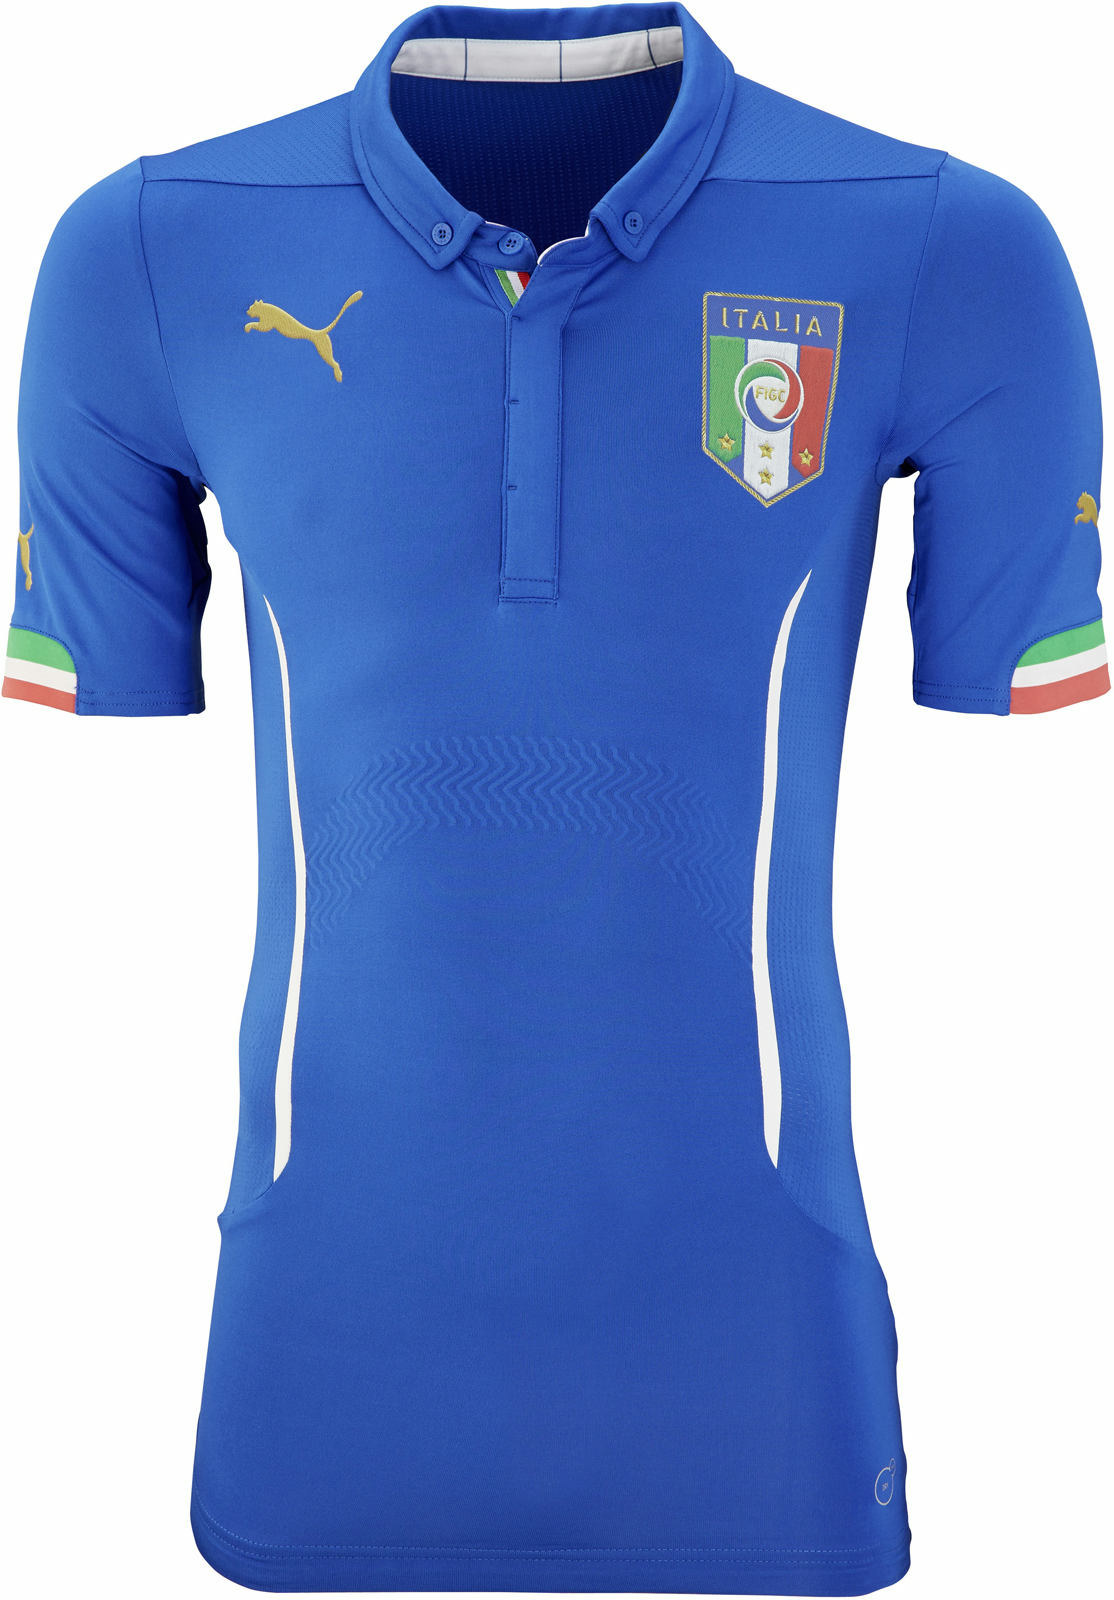 Italy+2014+World+Cup+Home+Kit+(1).jpg